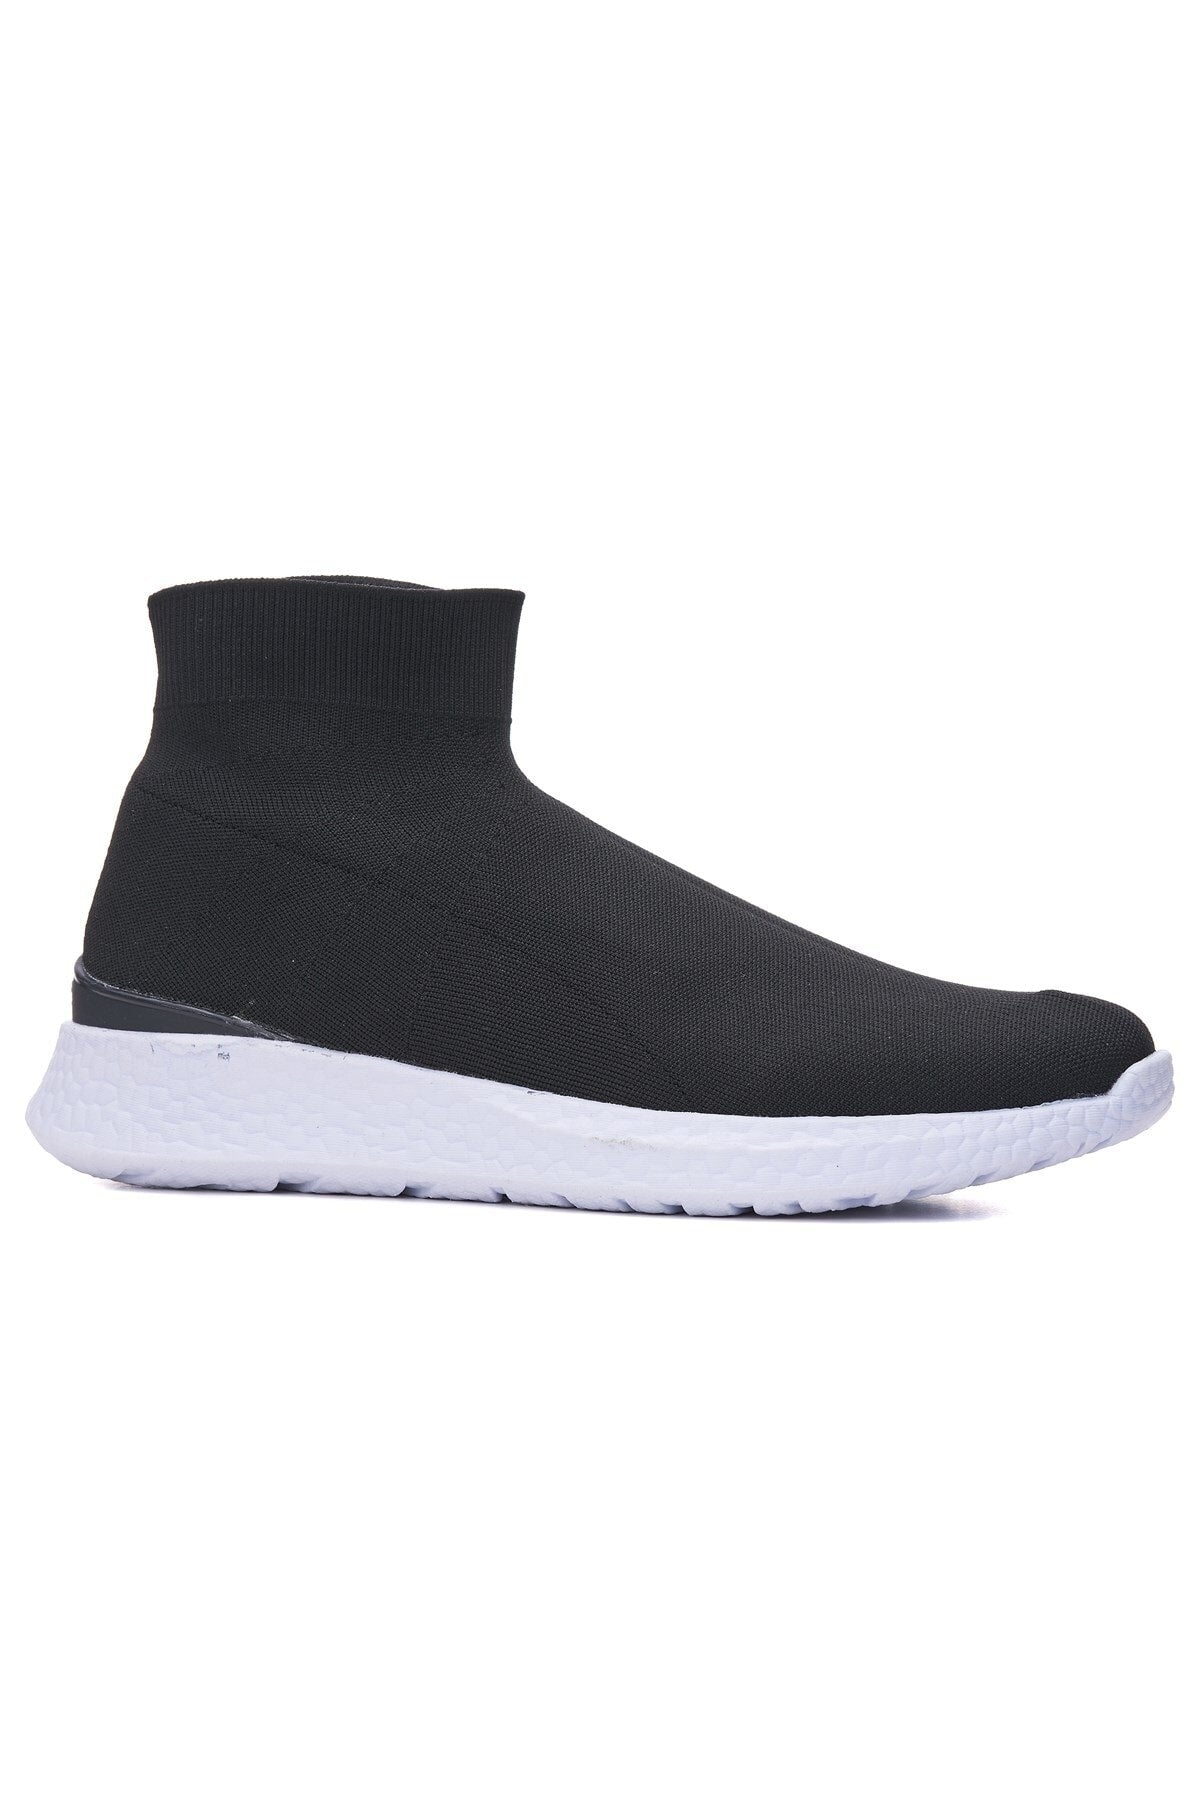 Daily Men's black and white sneaker stretch socks in the form of comfortable flexible lace-free knitwear sneakers 177-m